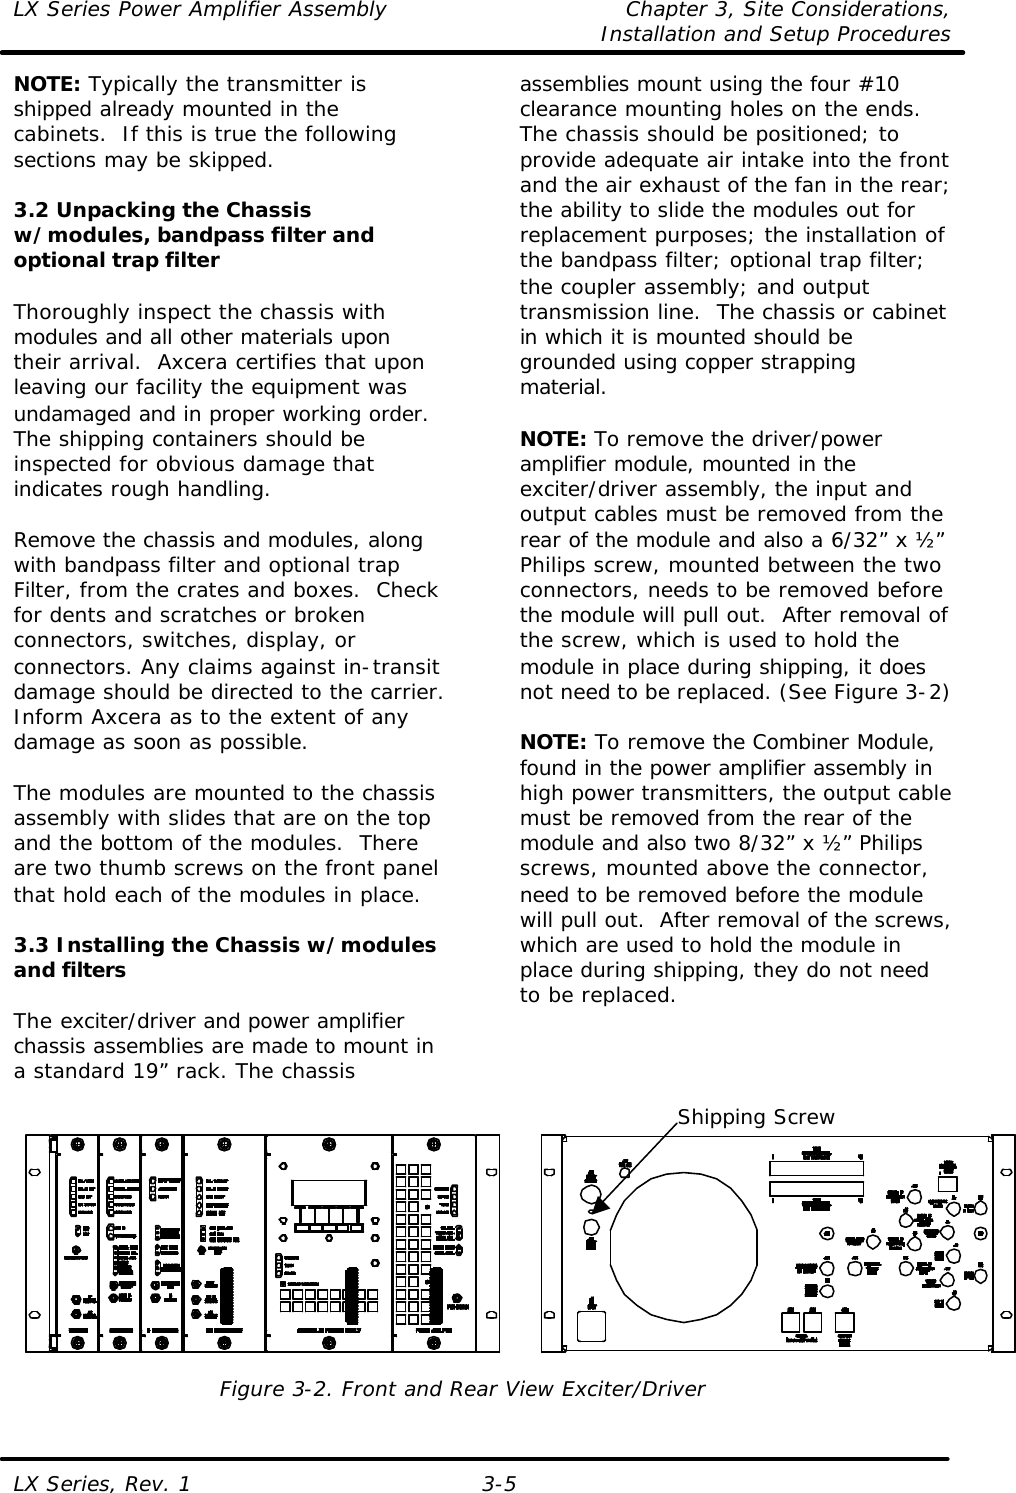 LX Series Power Amplifier Assembly Chapter 3, Site Considerations,   Installation and Setup Procedures LX Series, Rev. 1 3-5 NOTE: Typically the transmitter is shipped already mounted in the cabinets.  If this is true the following sections may be skipped.  3.2 Unpacking the Chassis w/modules, bandpass filter and optional trap filter  Thoroughly inspect the chassis with modules and all other materials upon their arrival.  Axcera certifies that upon leaving our facility the equipment was undamaged and in proper working order. The shipping containers should be inspected for obvious damage that indicates rough handling.   Remove the chassis and modules, along with bandpass filter and optional trap Filter, from the crates and boxes.  Check for dents and scratches or broken connectors, switches, display, or connectors. Any claims against in-transit damage should be directed to the carrier. Inform Axcera as to the extent of any damage as soon as possible.  The modules are mounted to the chassis assembly with slides that are on the top and the bottom of the modules.  There are two thumb screws on the front panel that hold each of the modules in place.   3.3 Installing the Chassis w/modules and filters  The exciter/driver and power amplifier chassis assemblies are made to mount in a standard 19” rack. The chassis assemblies mount using the four #10 clearance mounting holes on the ends.  The chassis should be positioned; to provide adequate air intake into the front and the air exhaust of the fan in the rear; the ability to slide the modules out for replacement purposes; the installation of the bandpass filter; optional trap filter; the coupler assembly; and output transmission line.  The chassis or cabinet in which it is mounted should be grounded using copper strapping material.  NOTE: To remove the driver/power amplifier module, mounted in the exciter/driver assembly, the input and output cables must be removed from the rear of the module and also a 6/32” x ½” Philips screw, mounted between the two connectors, needs to be removed before the module will pull out.  After removal of the screw, which is used to hold the module in place during shipping, it does not need to be replaced. (See Figure 3-2)  NOTE: To remove the Combiner Module, found in the power amplifier assembly in high power transmitters, the output cable must be removed from the rear of the module and also two 8/32” x ½” Philips screws, mounted above the connector, need to be removed before the module will pull out.  After removal of the screws, which are used to hold the module in place during shipping, they do not need to be replaced.     Figure 3-2. Front and Rear View Exciter/Driver Shipping Screw 